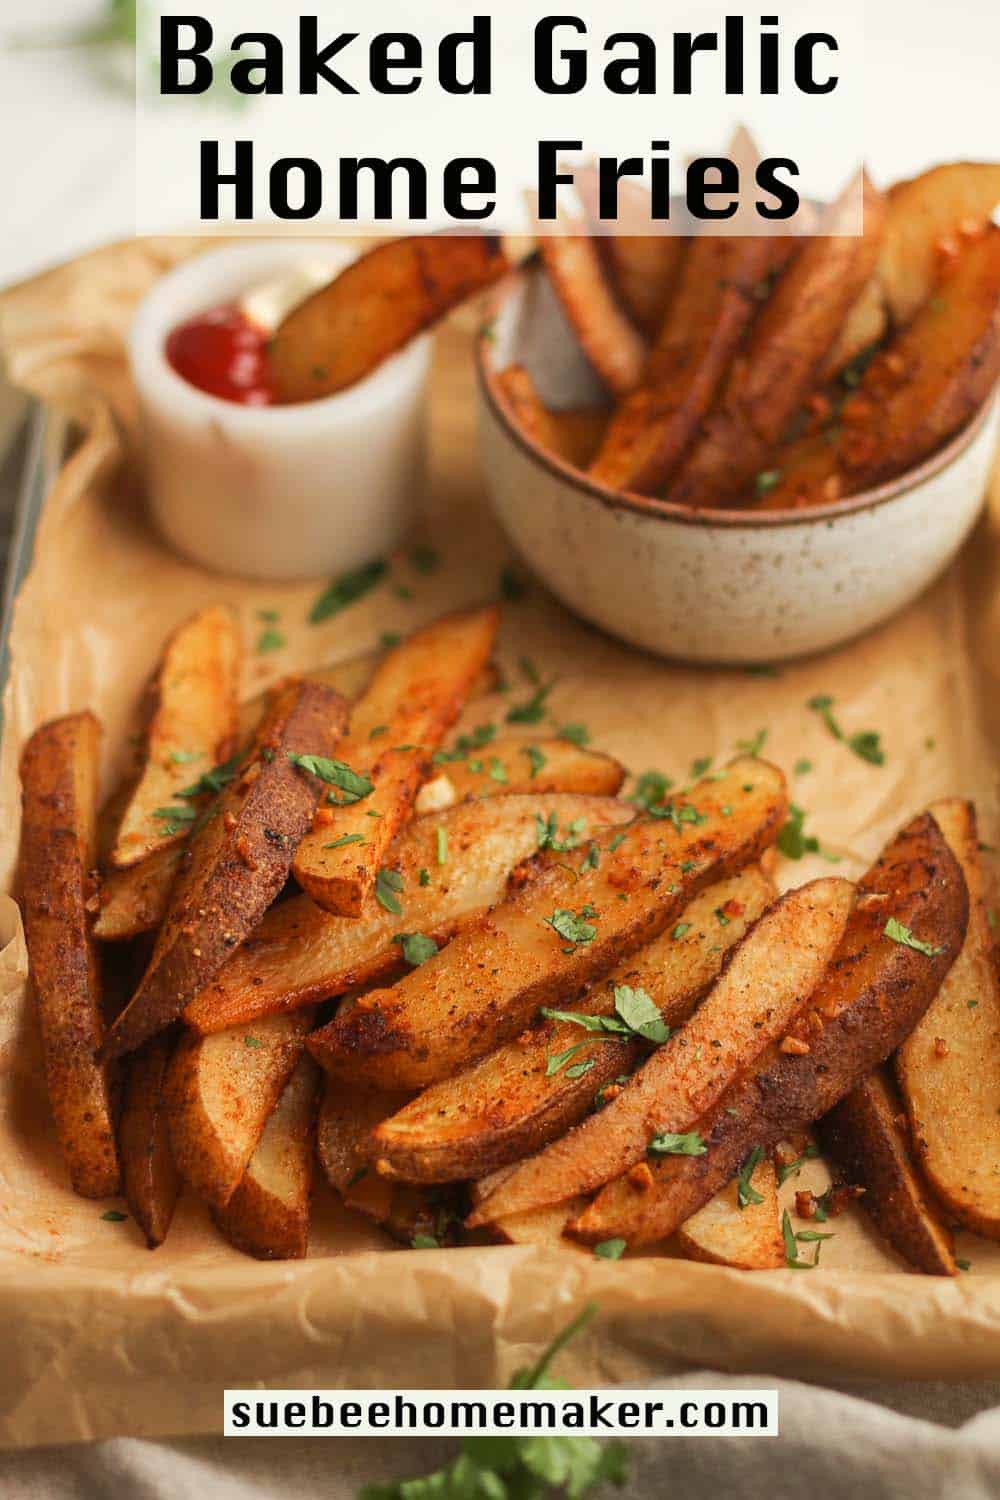 A pan of baked garlic home fries with a bowl of fries and a small bowl of ketchup and mayo.